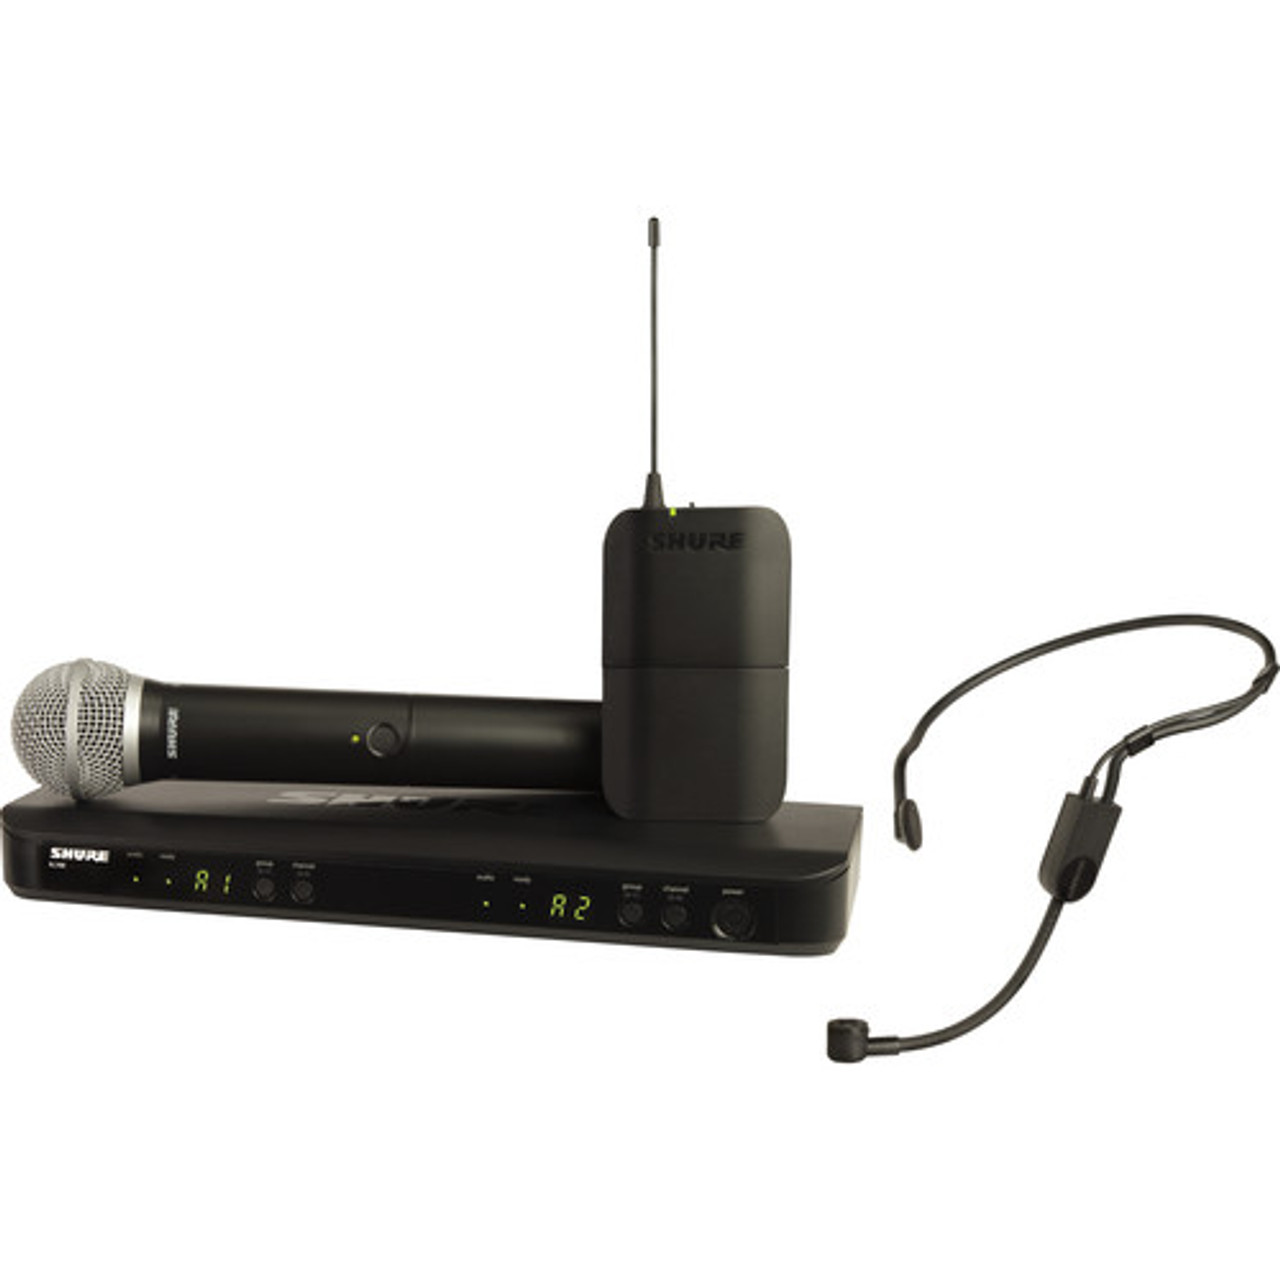 Shure BLX1288/P31-H9 Dual-Channel Wireless Combo Headset & Handheld Microphone System (H9: 512 - 542 MHz) (BLX1288/P31-H9)